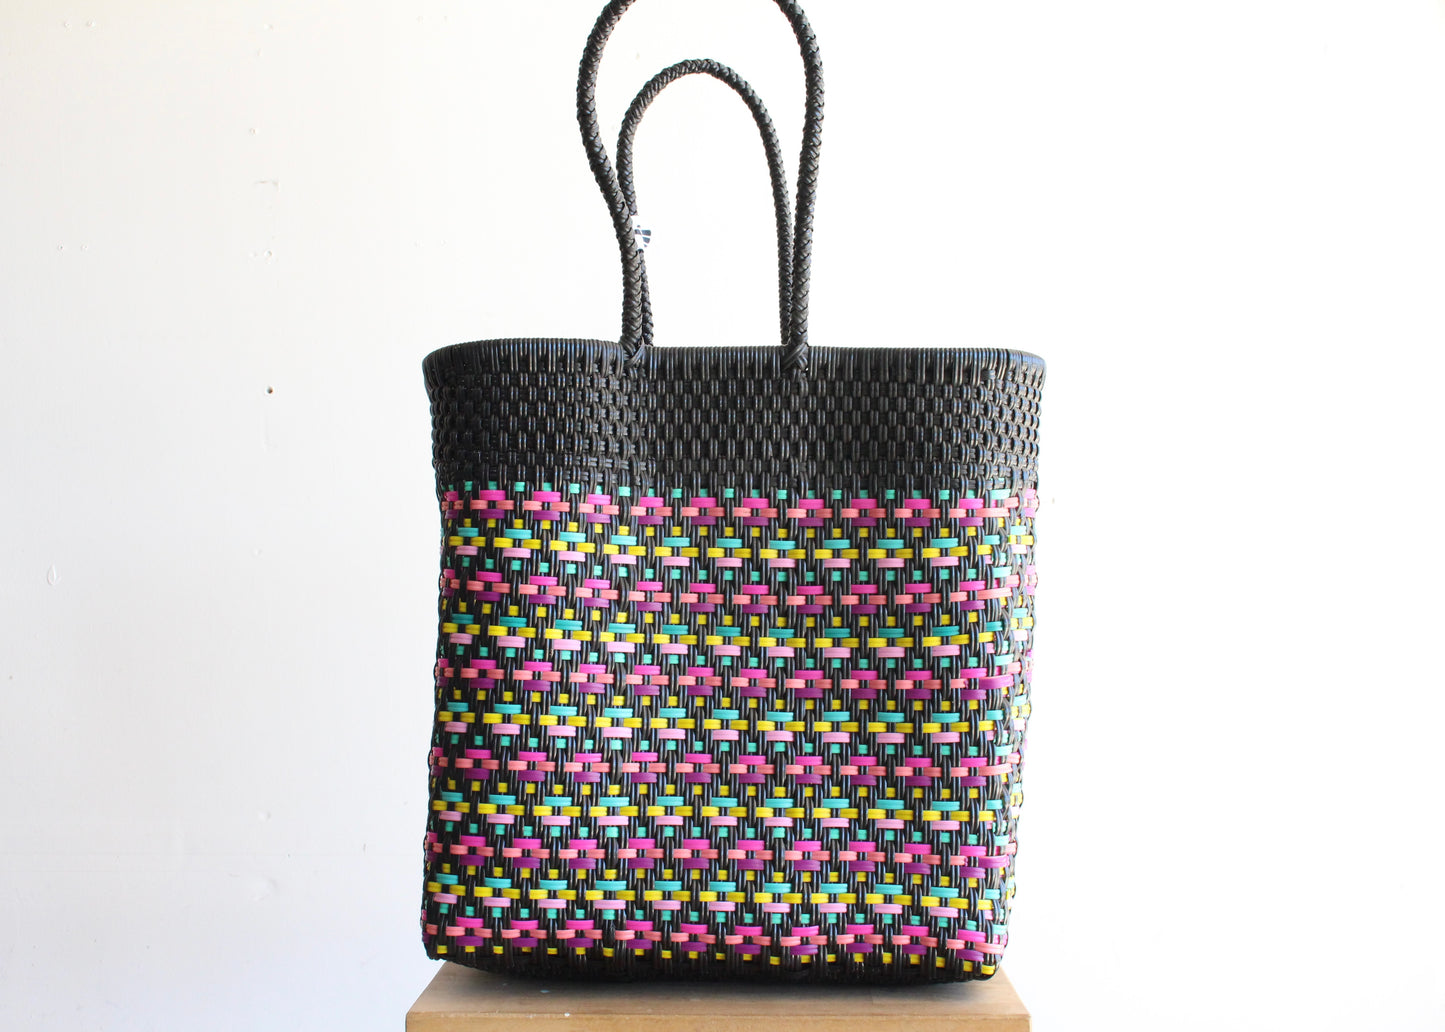 Black & Colors Handwoven Mexican Tote by MexiMexi